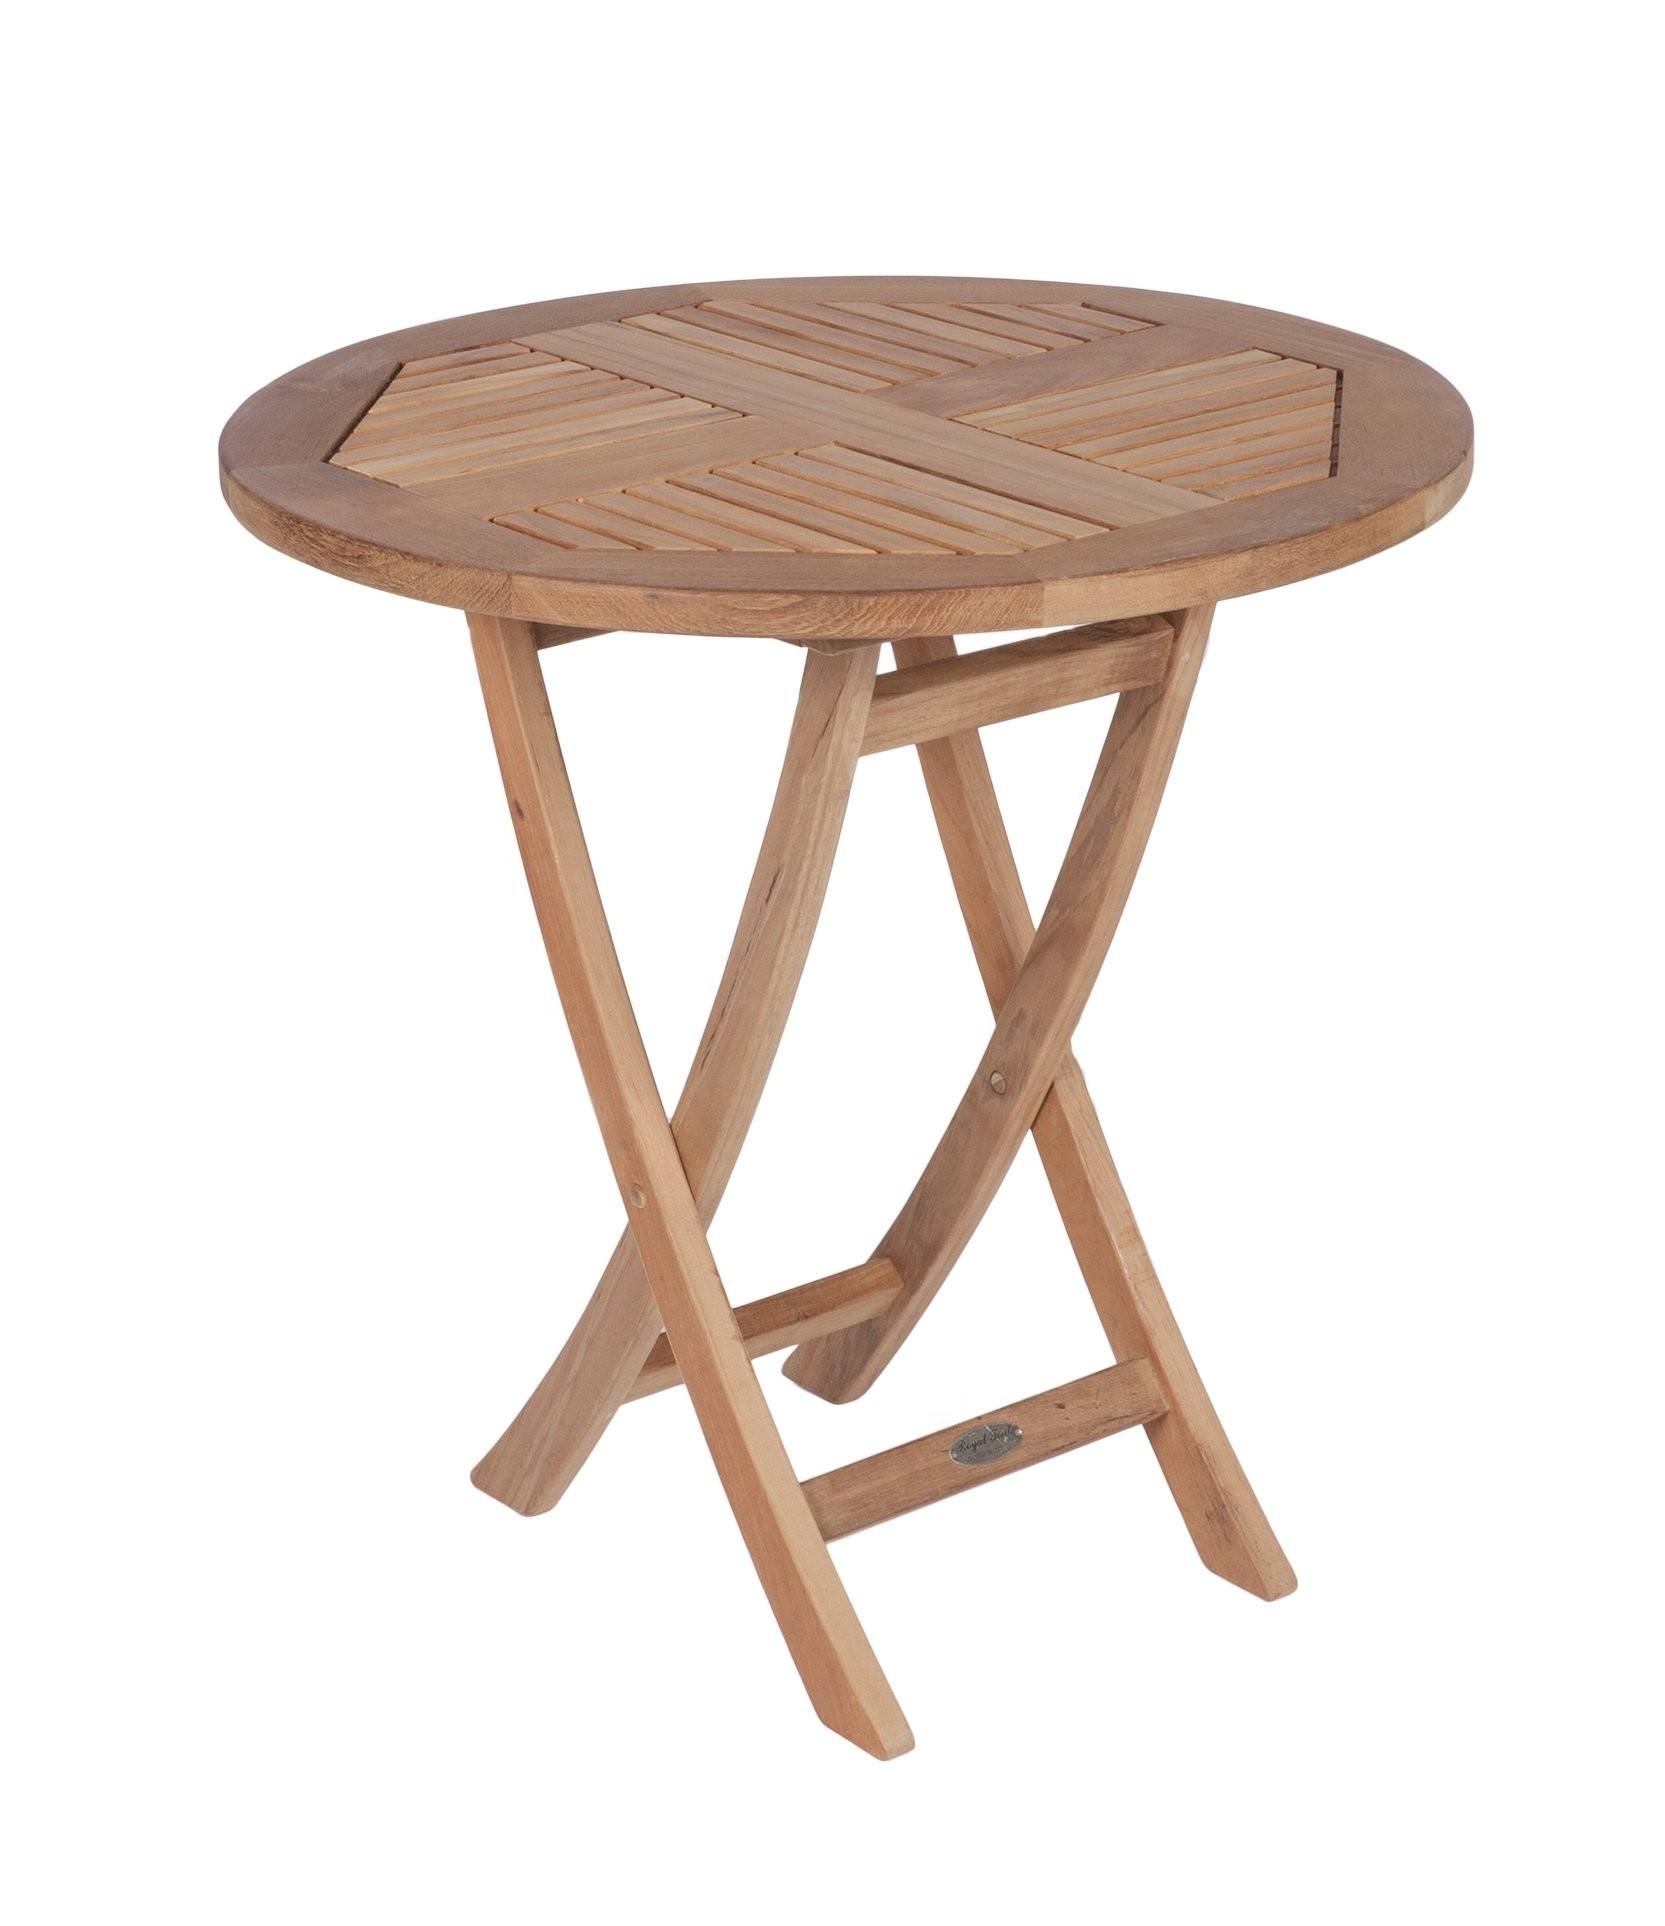 30 round teak folding table by royal teak collection